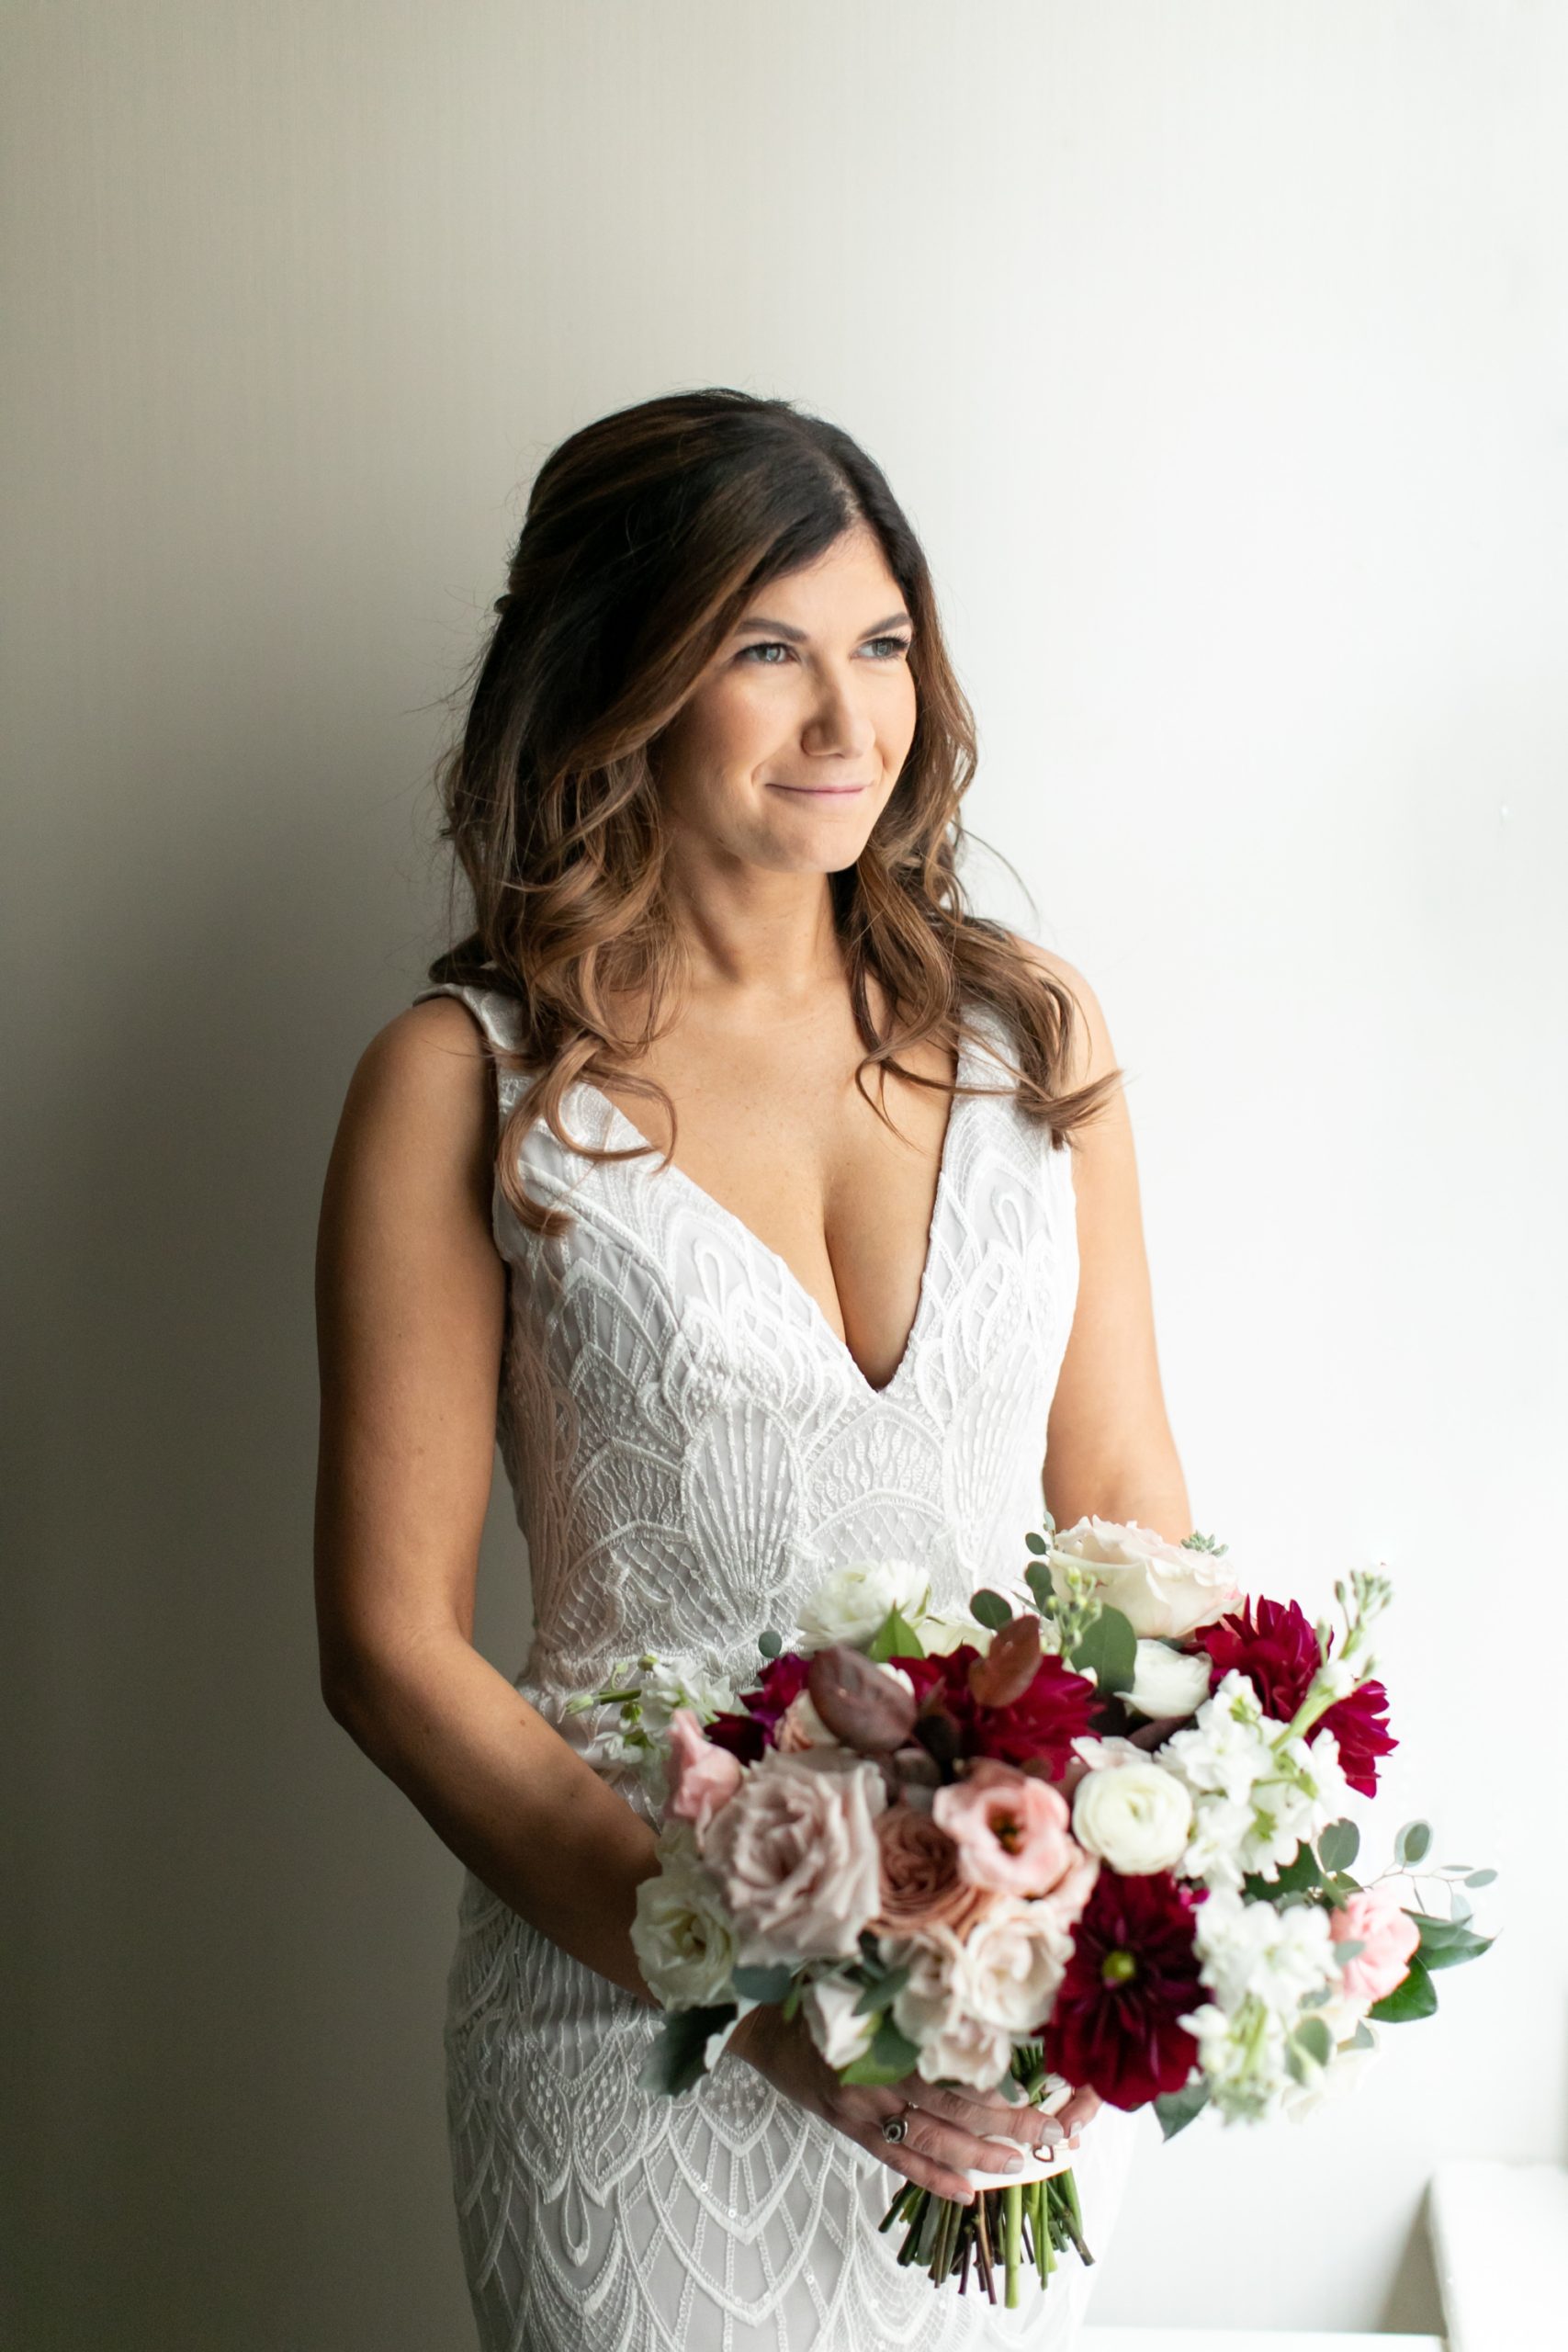 the bride wore a lace wedding dress and carried a large bridal bouquet